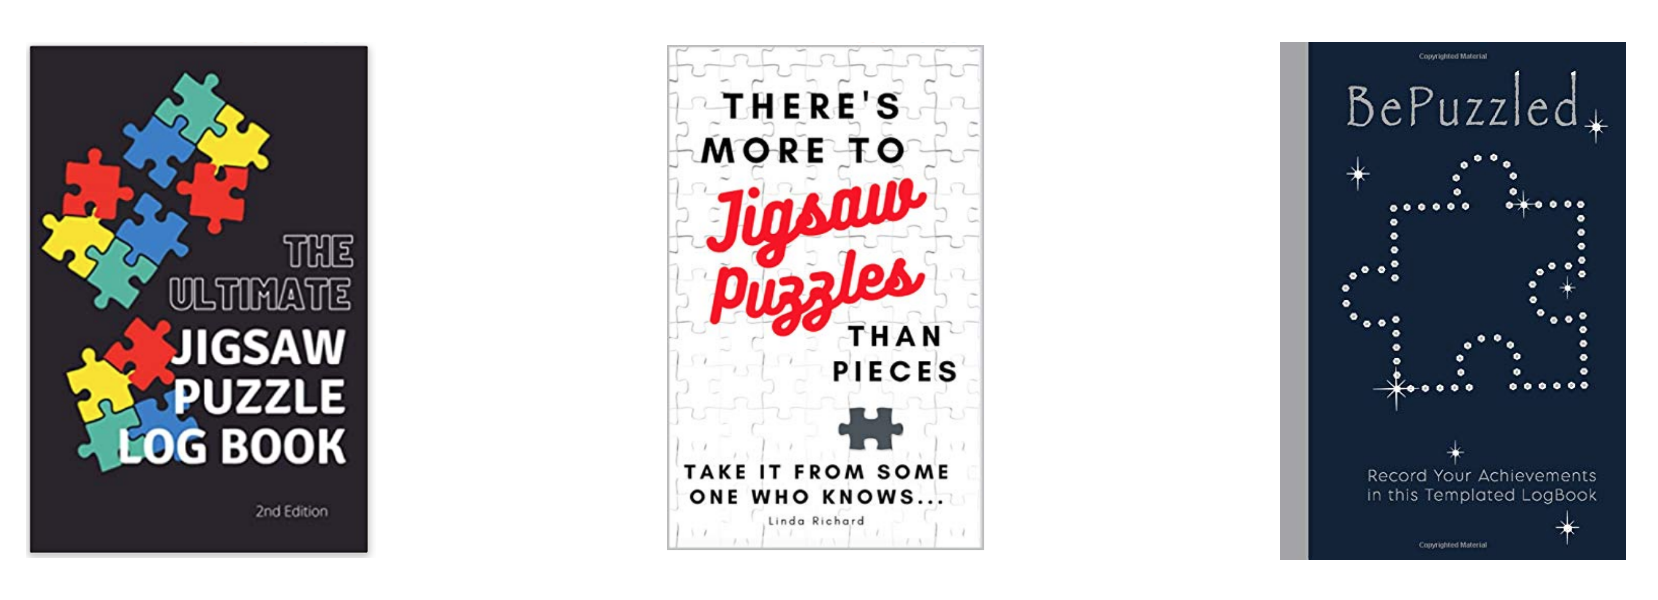 jigsaw-puzzle-book